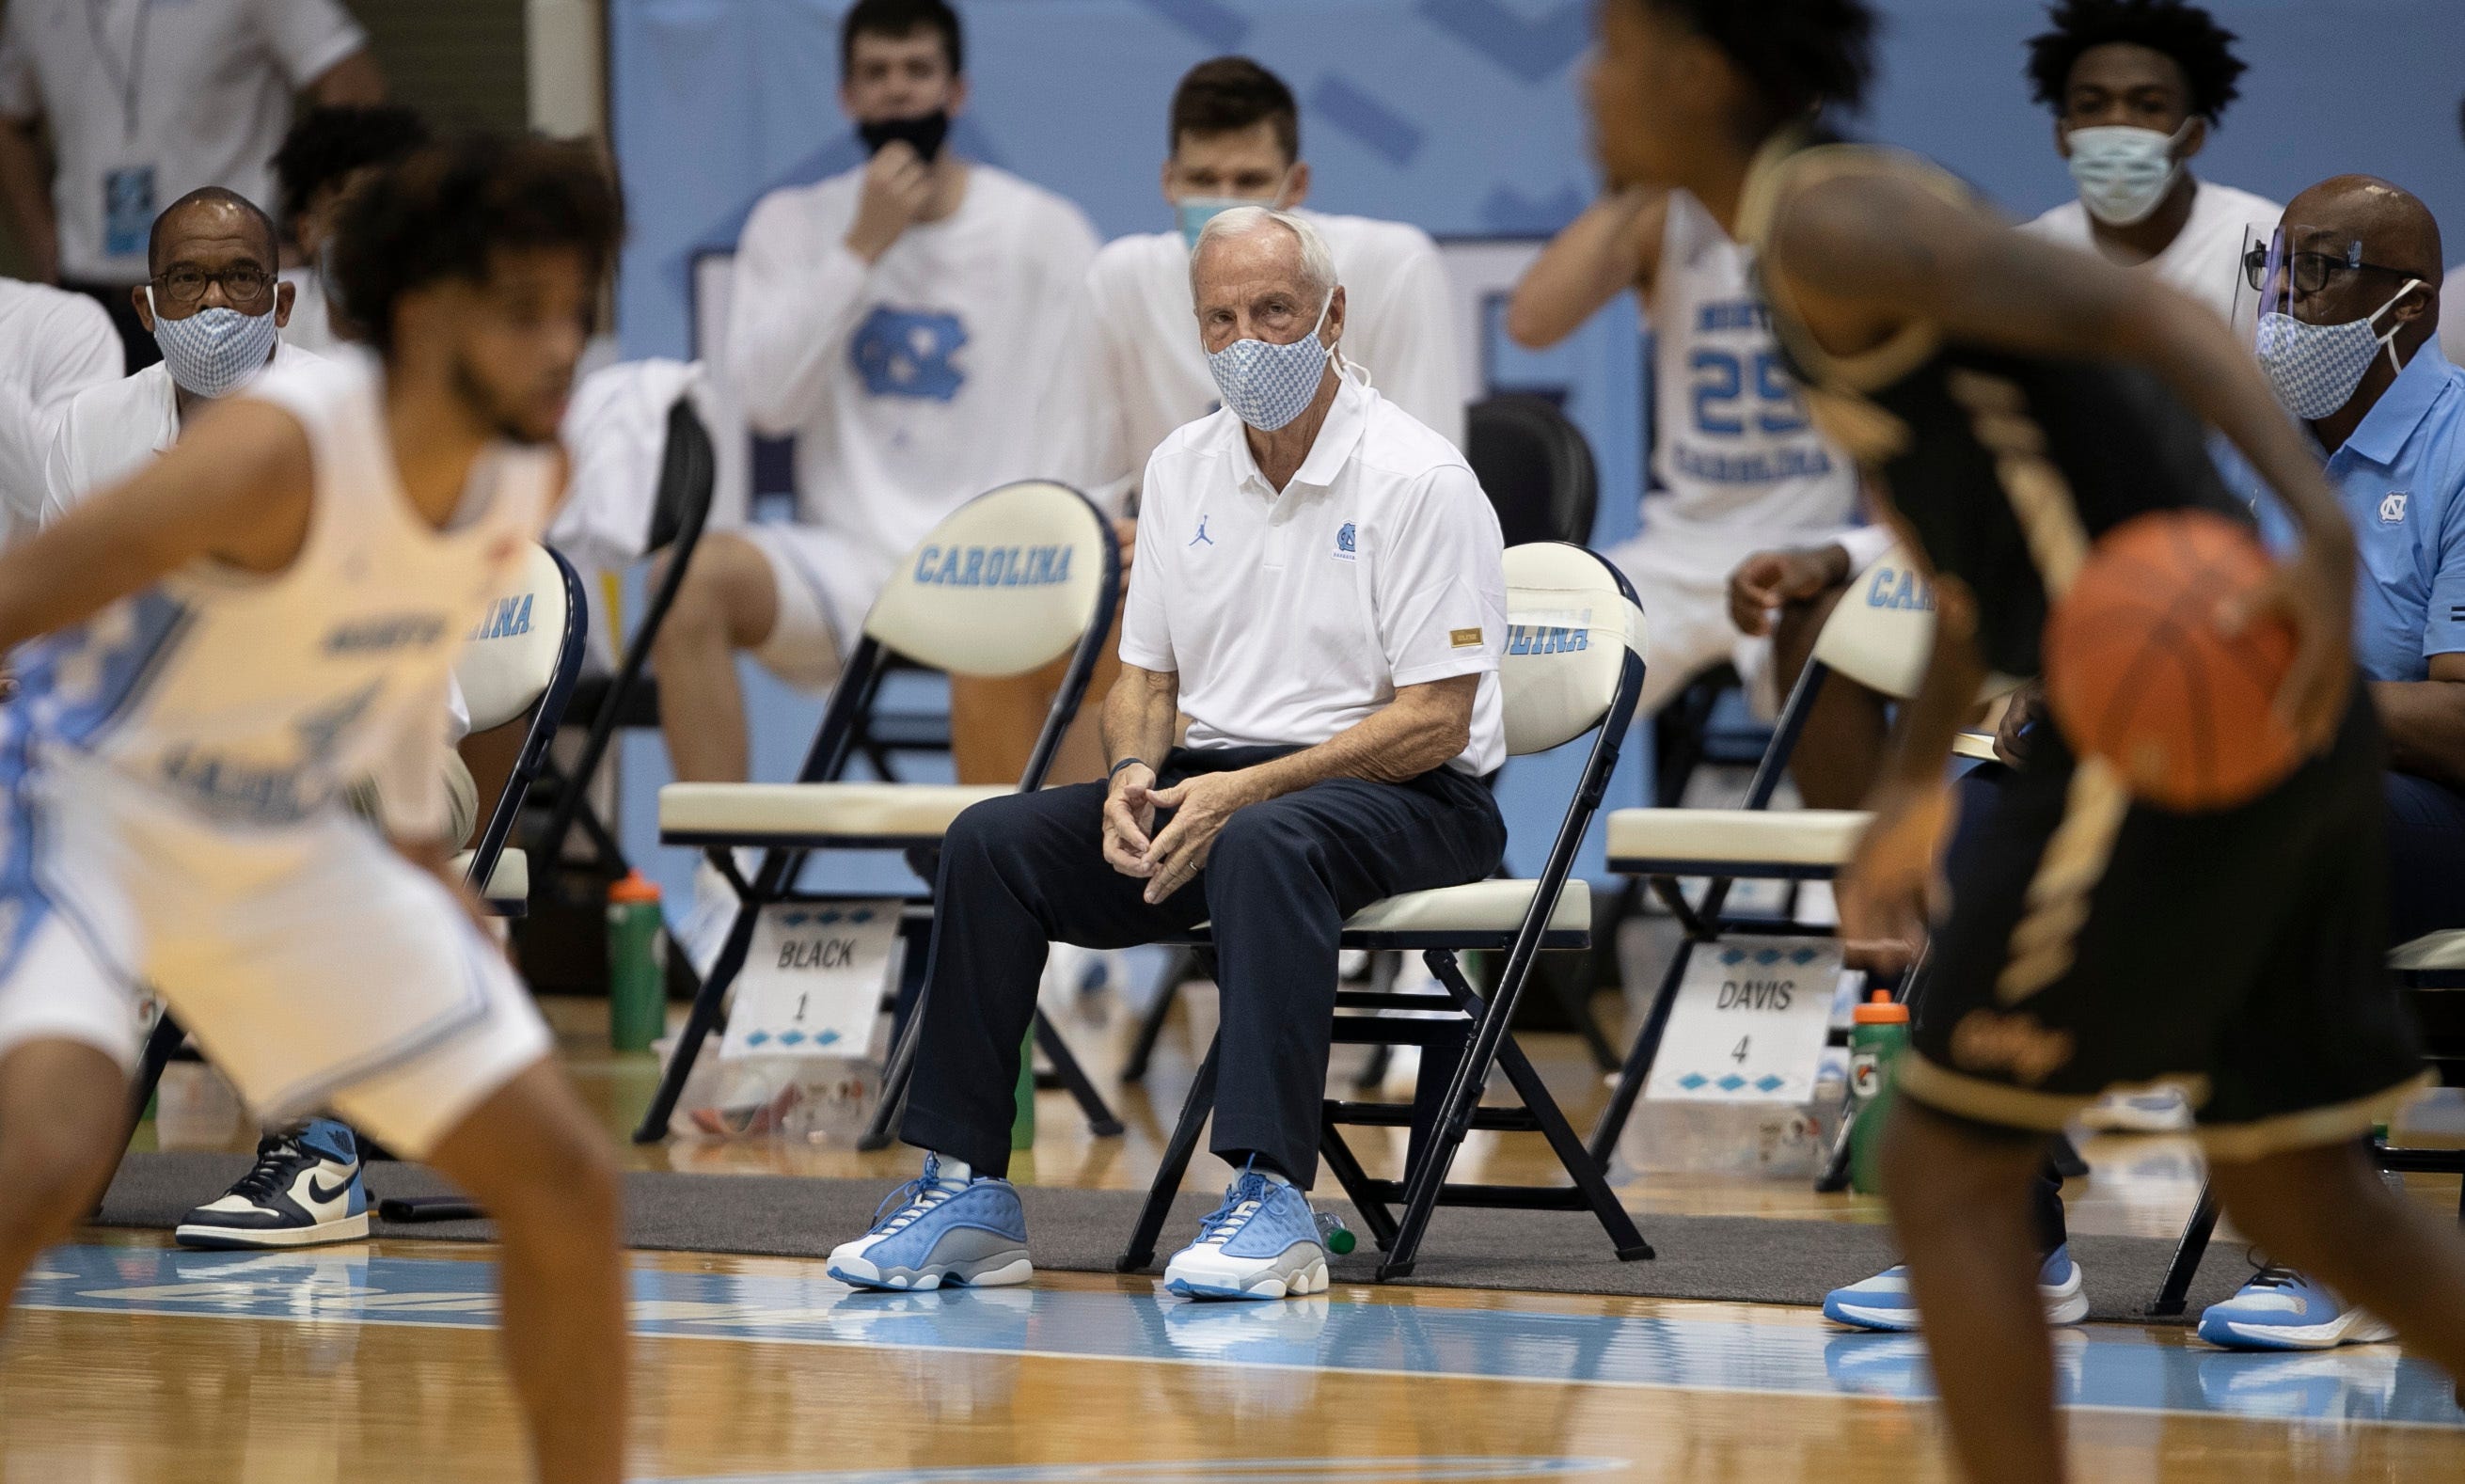 Maui measuring stick: UNC tries to use tournament for growth with freshmen